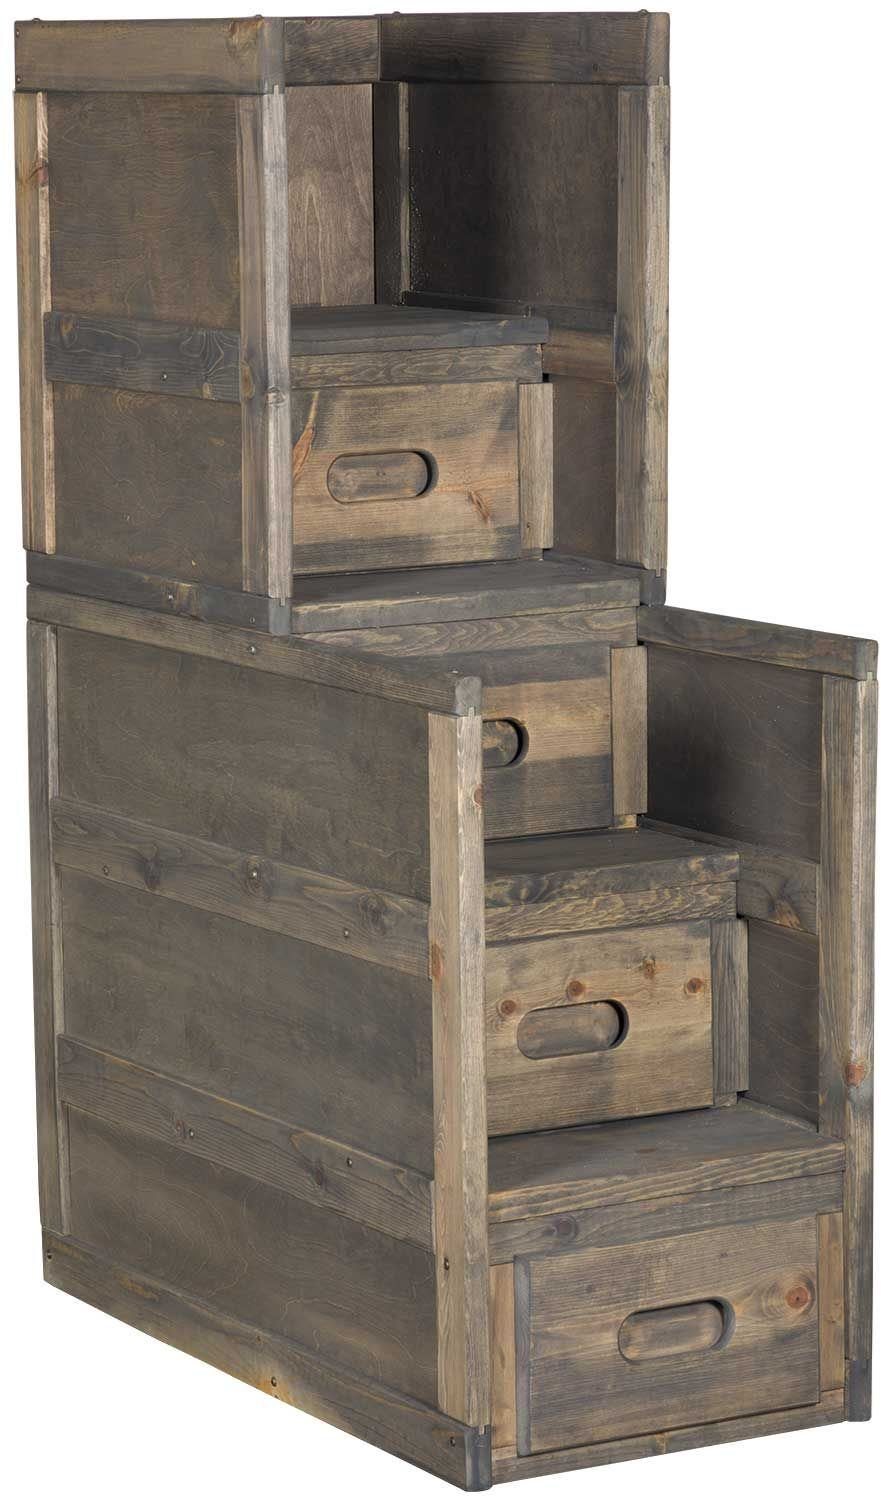 Trendwood Inc. Bunkhouse Youth Stairway Chest